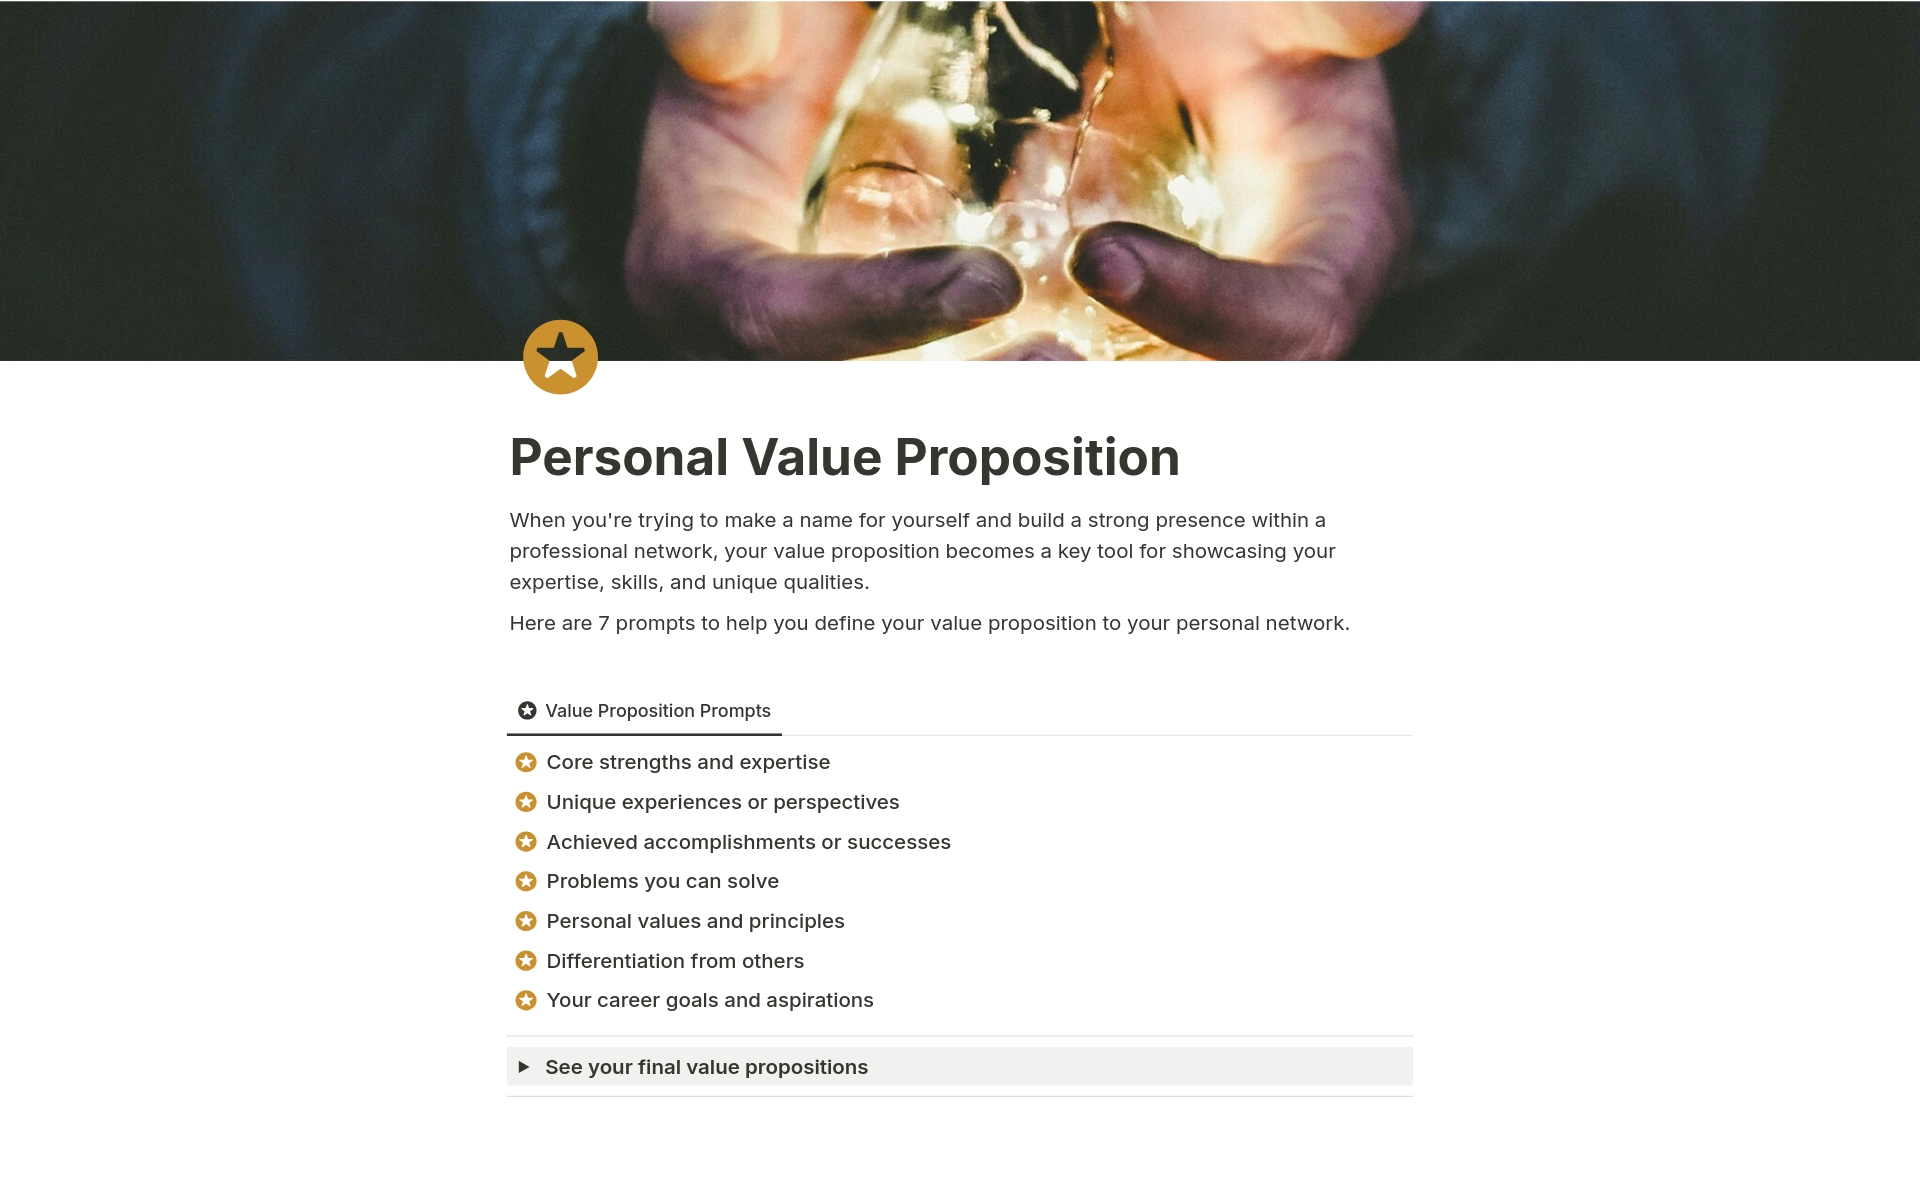 In a world where connections matter, defining your unique value is key to unlocking opportunities. Introducing the Personal Value Proposition, a Notion template designed to guide you through a transformative journey of self-discovery.